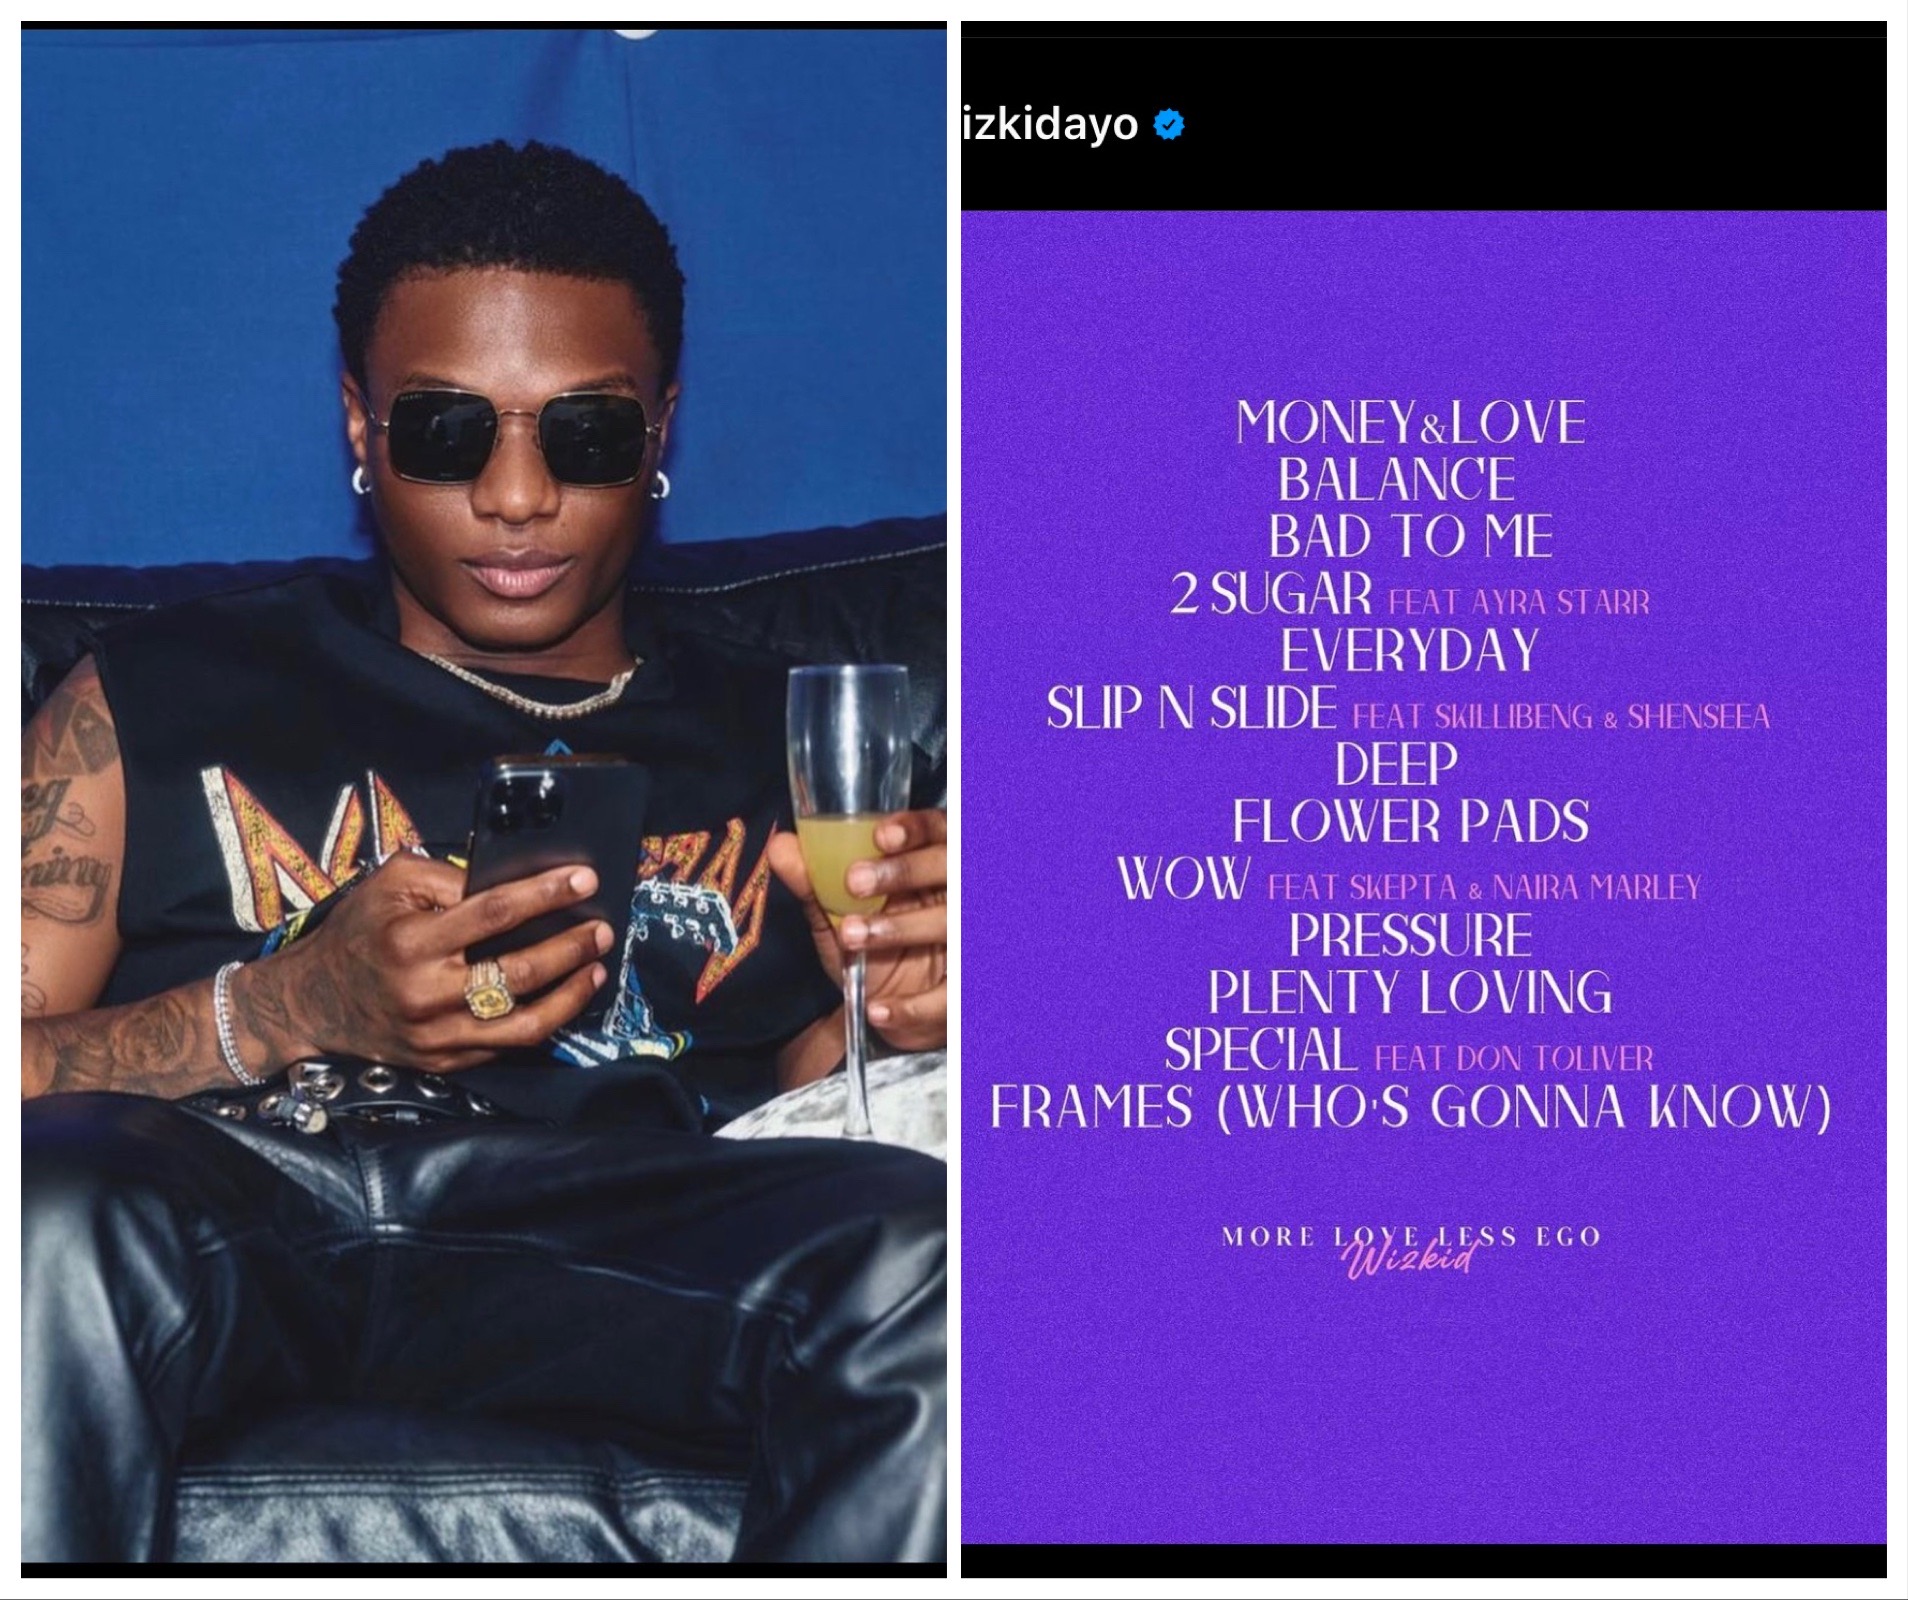 Wizkid releases date, track list for new album MLLE The Nation Newspaper